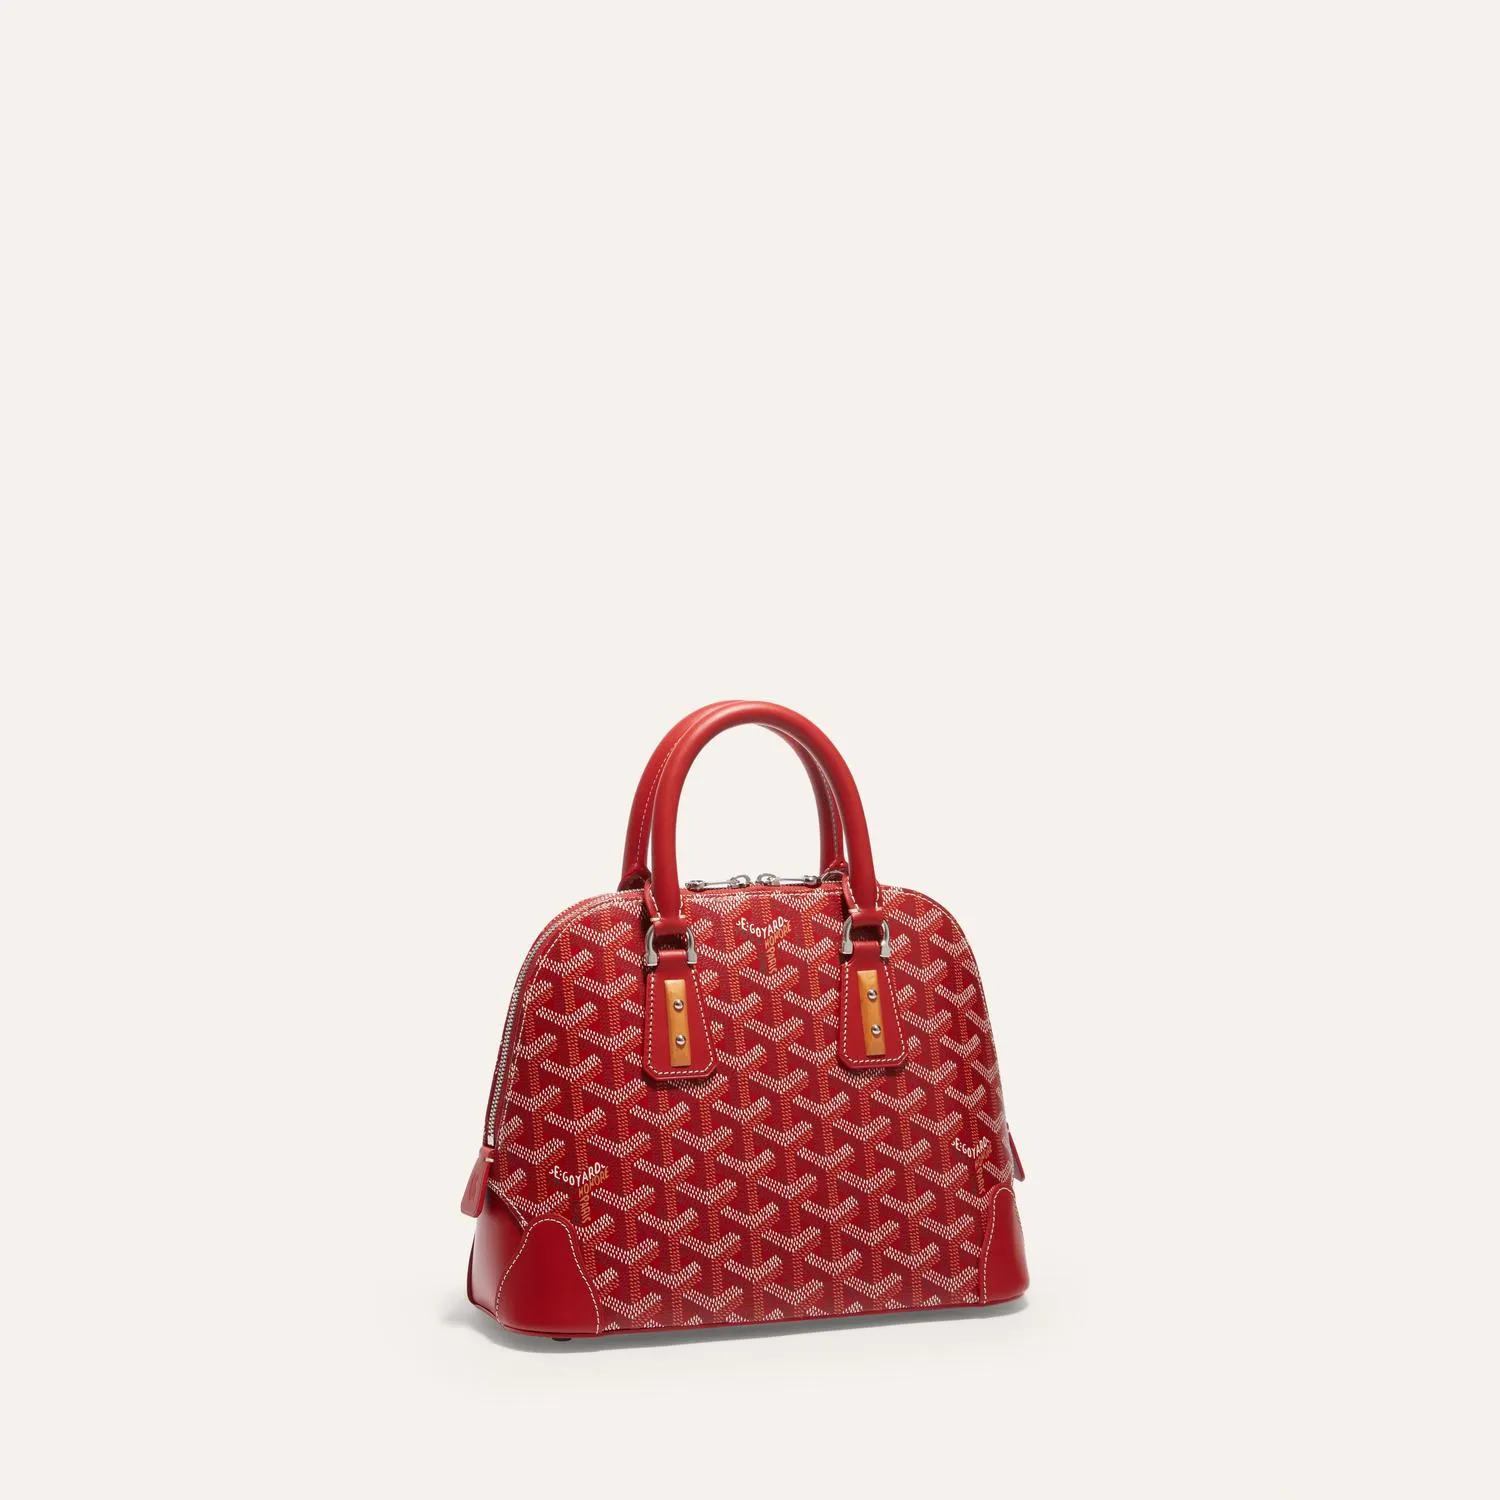 Maison Goyard - Welcome to the new world of Goyard at